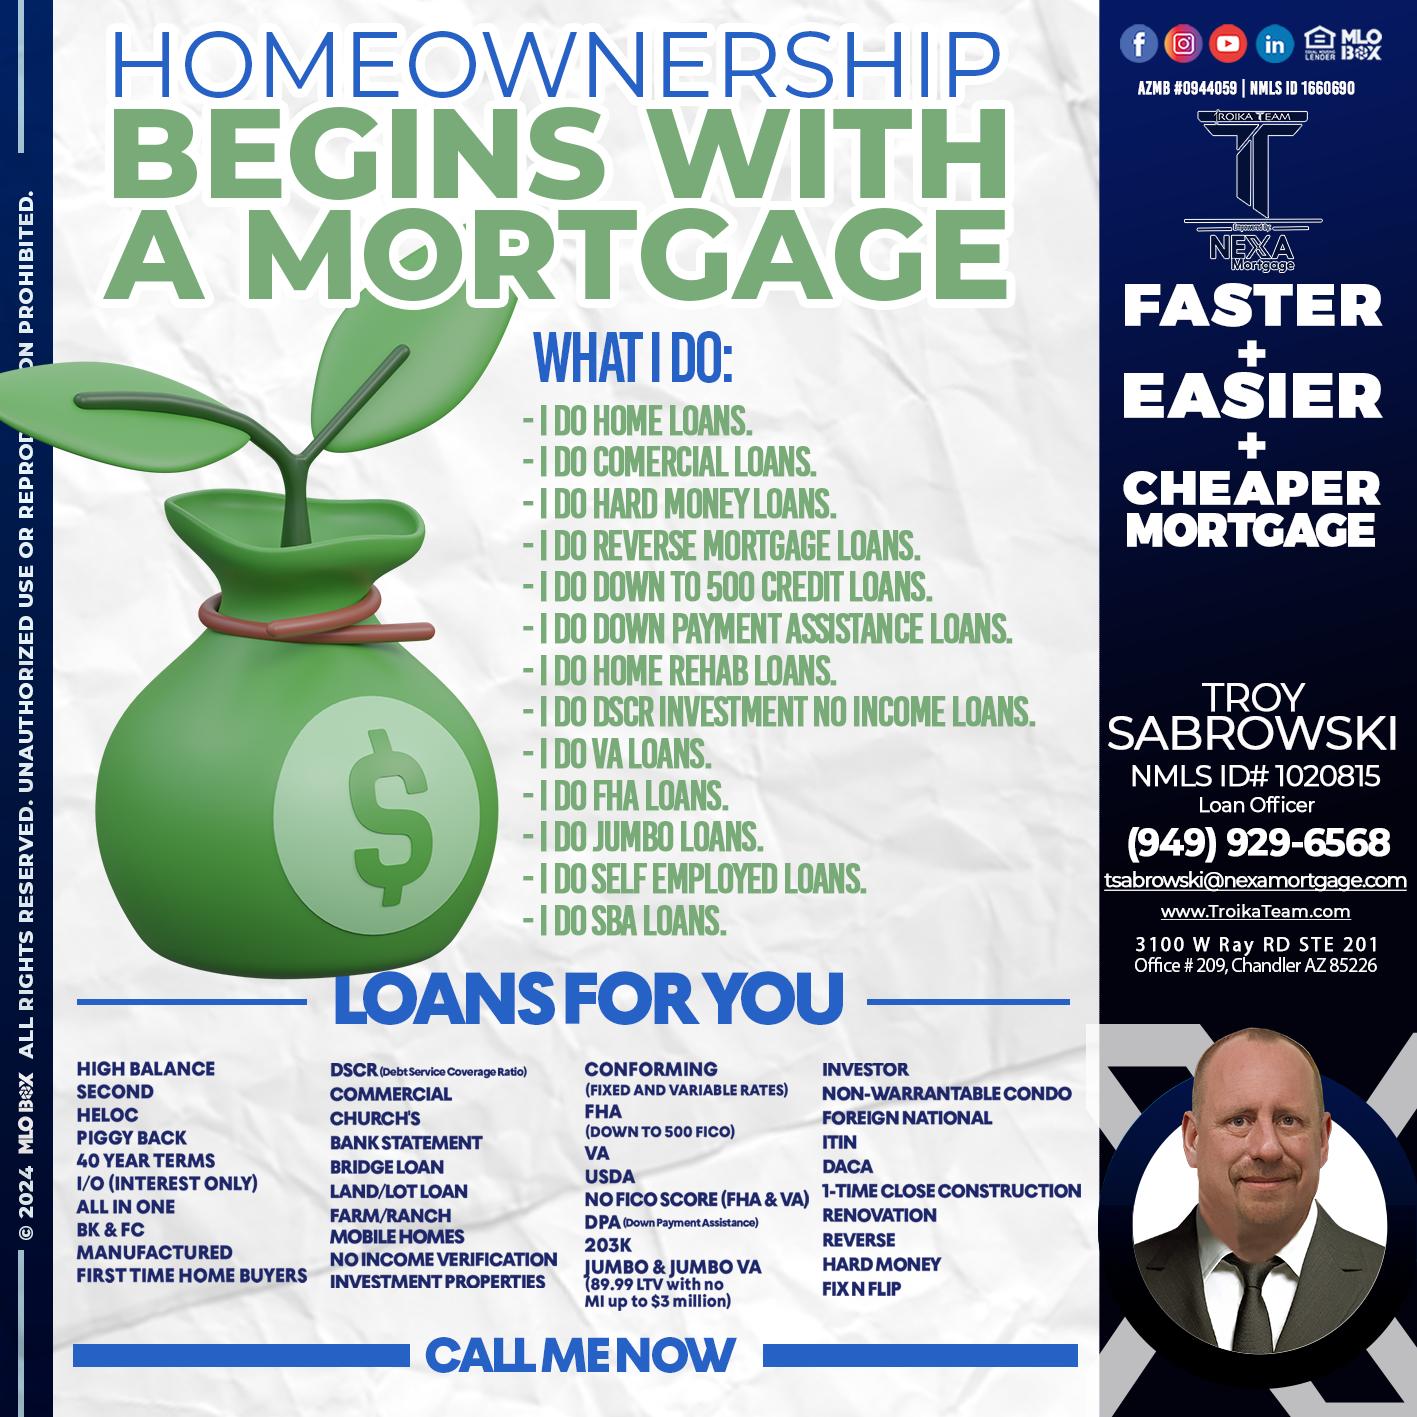 HOME OWNERSHIP - Troy Sabrowski -Loan Officer